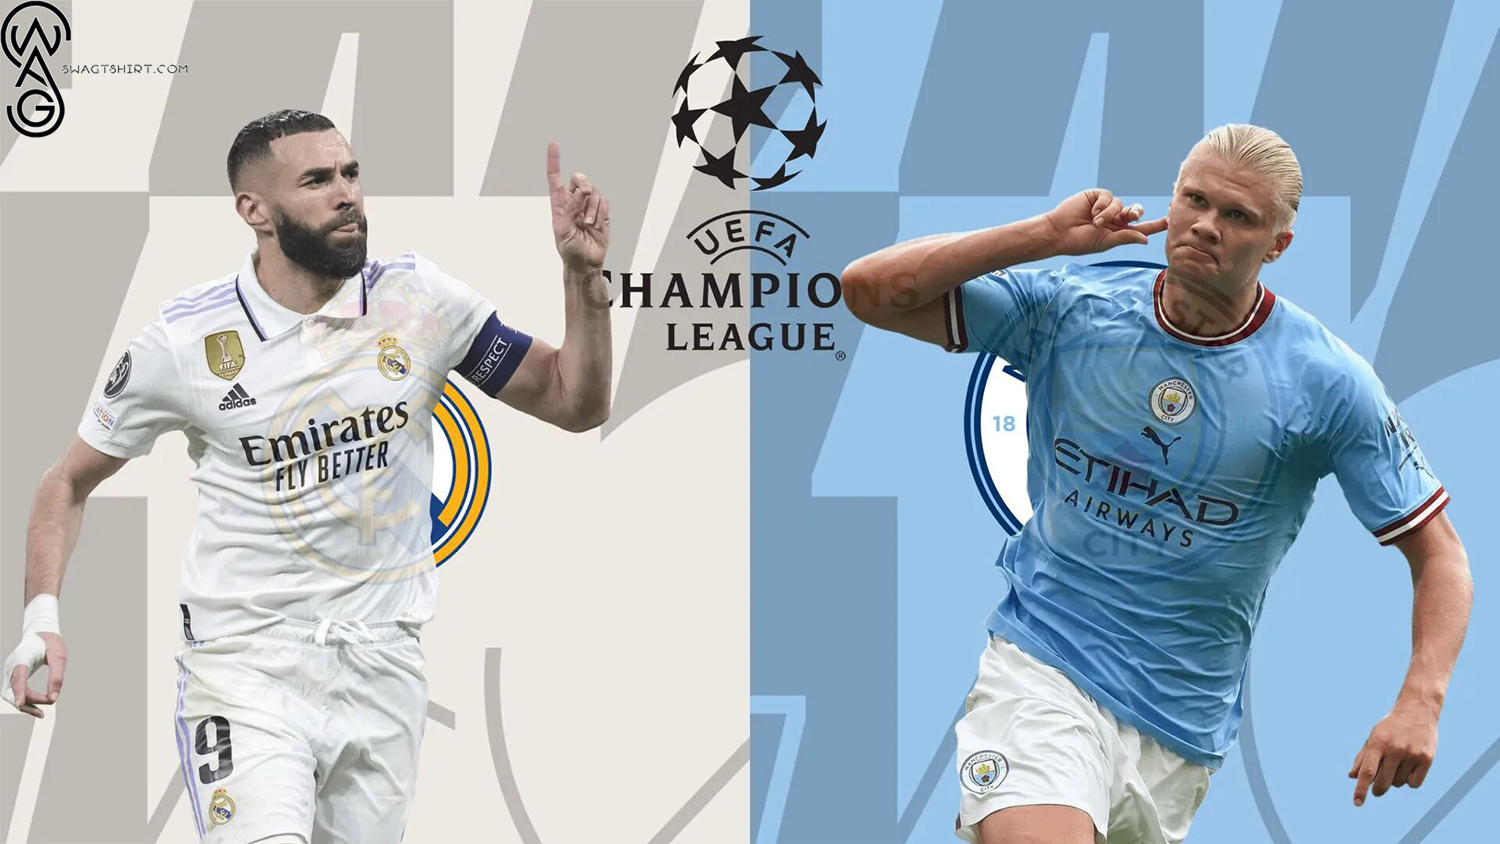 Champions League Epic Real Madrid and Manchester City Collide at the Bernabéu